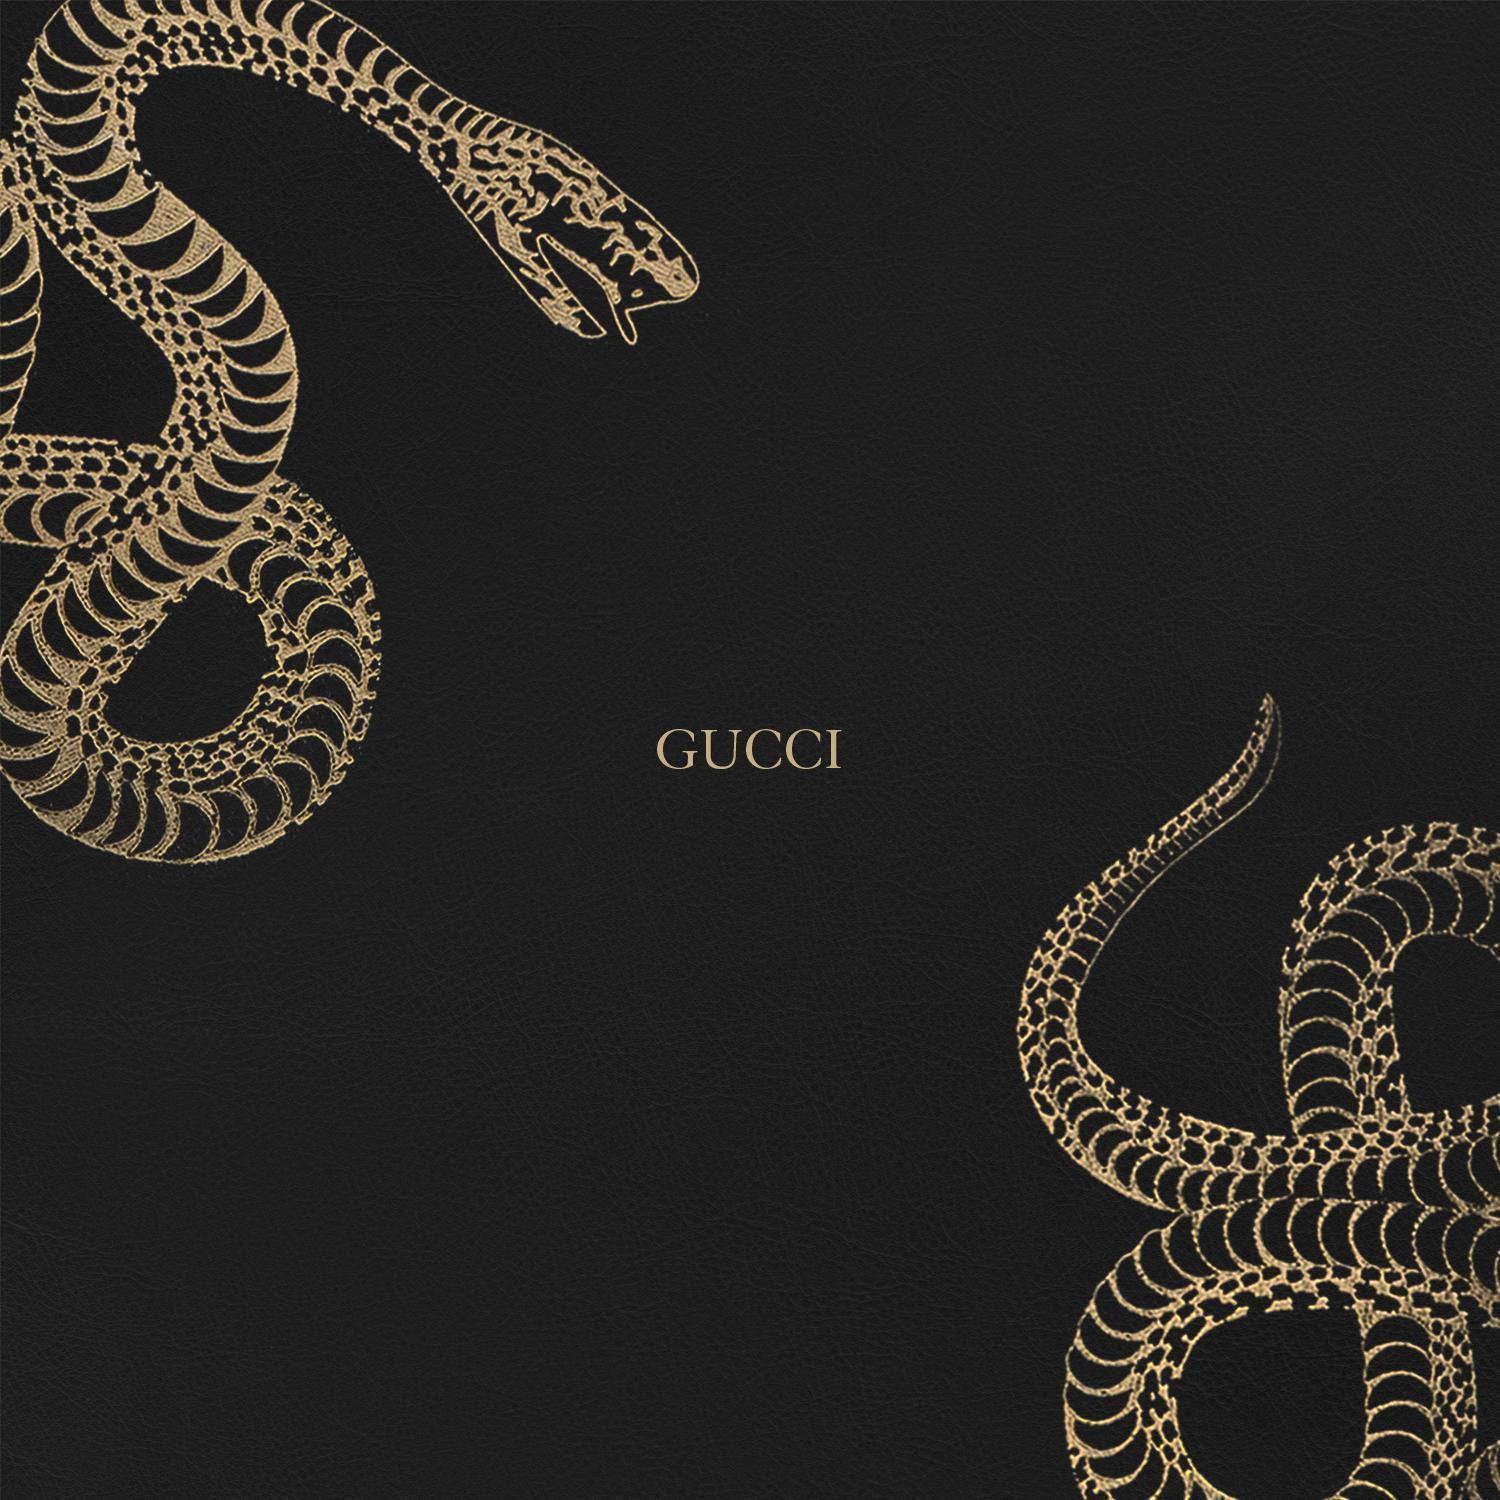 Gucci 1500X1500 Wallpaper and Background Image